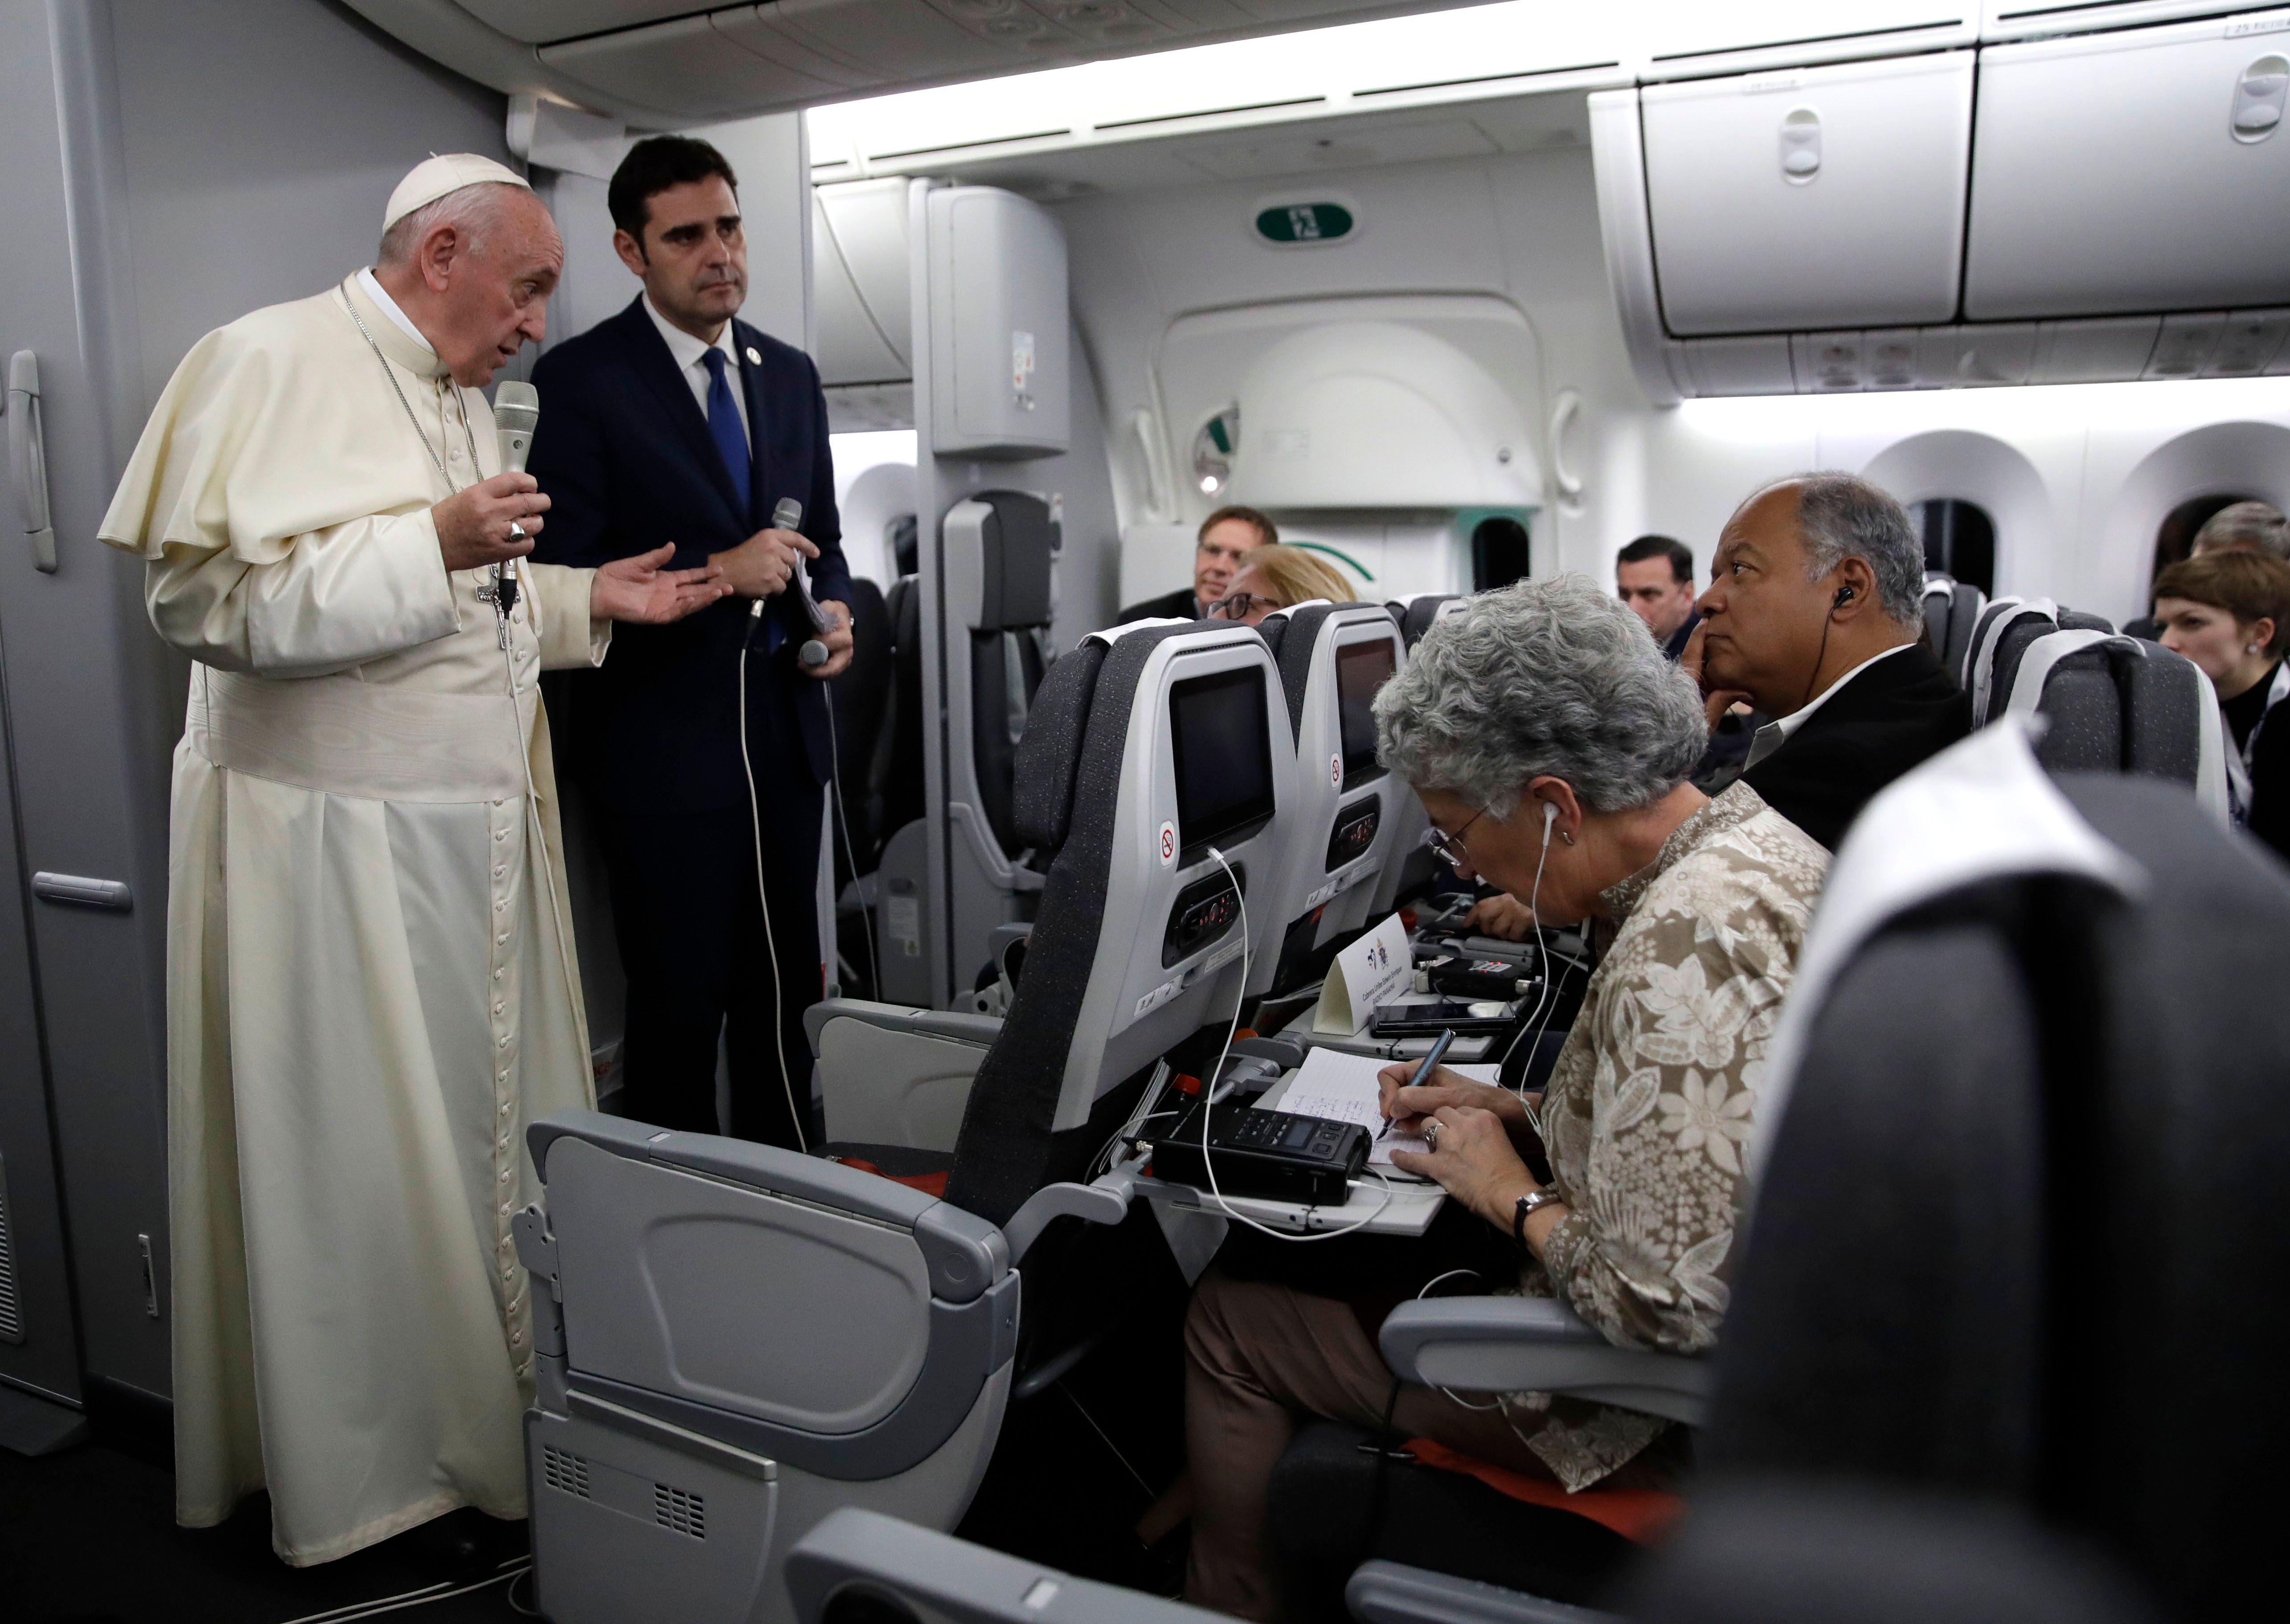 Pope Francis, flanked by Vatican spokesman Alessandro Gisotti (R) anwers journalists questions in the plane following the take off from Panama City on January 27, 2019 after participating in World Youth Day. (ALESSANDRA TARANTINO/AFP/Getty Images)